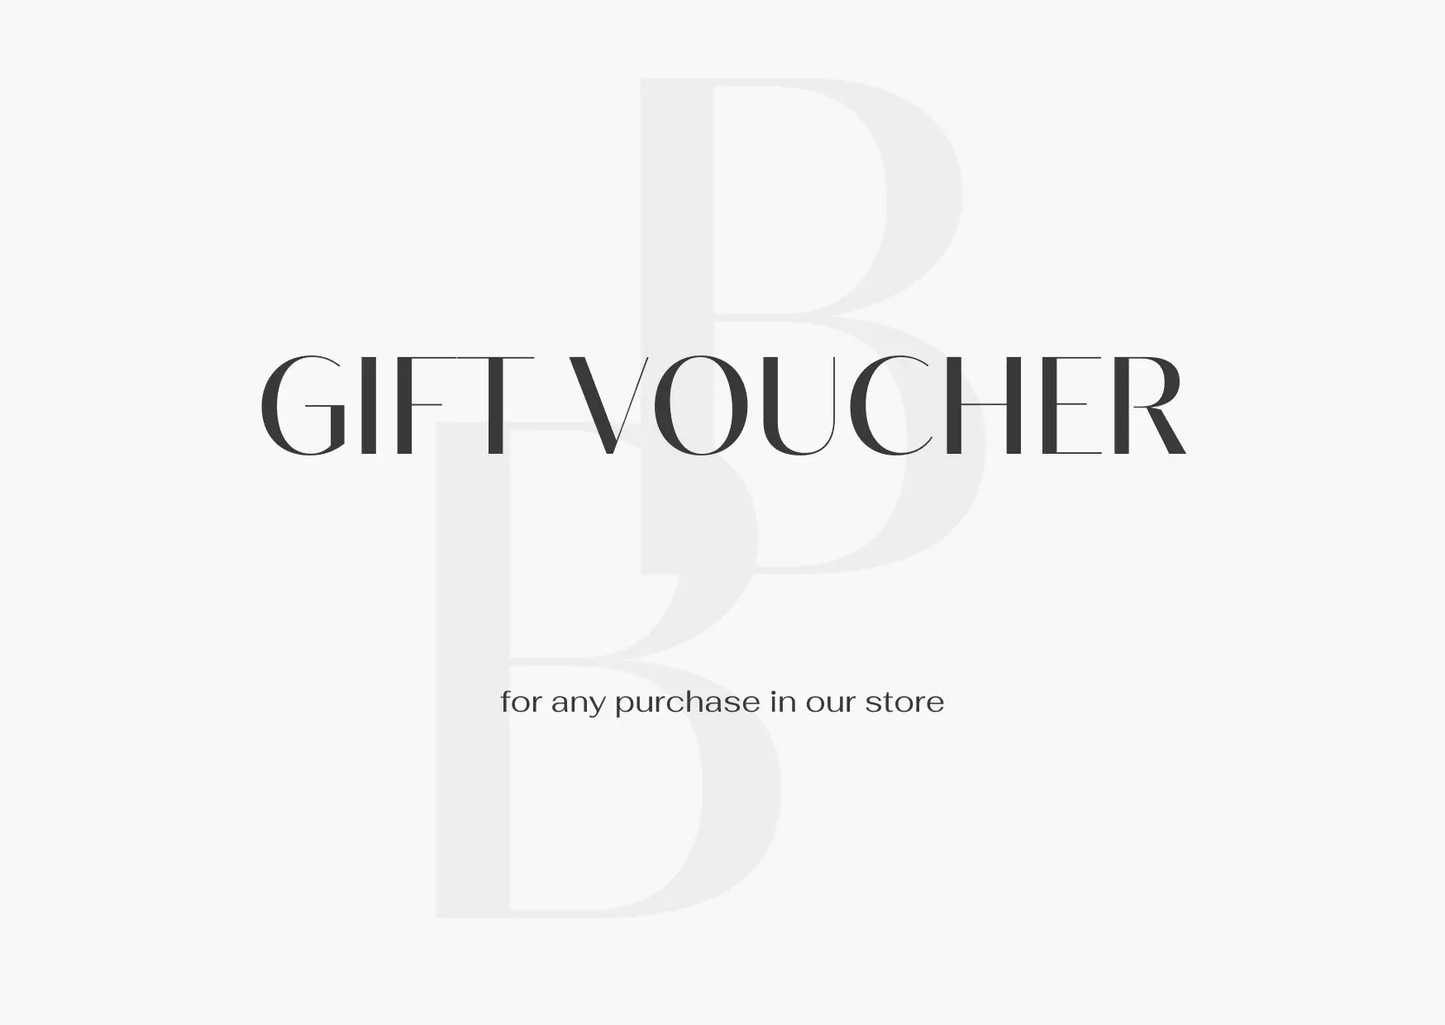 Treat Your Loved Ones with a Gift Voucher - Bark Bites